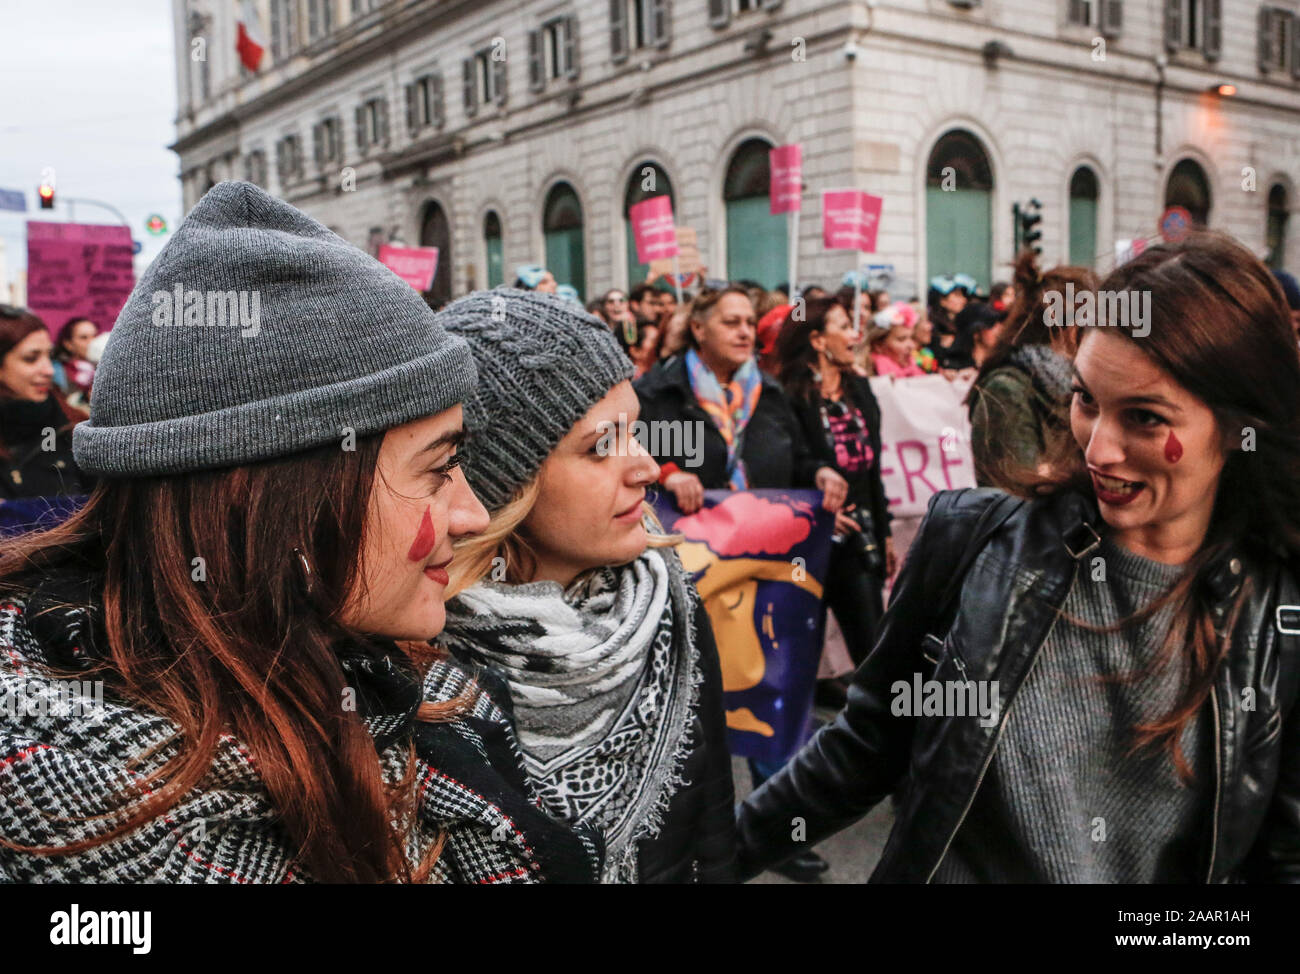 Rome, Italy, 23 Nov 2019. Protesters attend the demonstration against male violence on women. Credit: Riccardo De Luca - Update Images/Alamy Live News Credit: Update Images/Alamy Live News Credit: Update Images/Alamy Live News Stock Photo